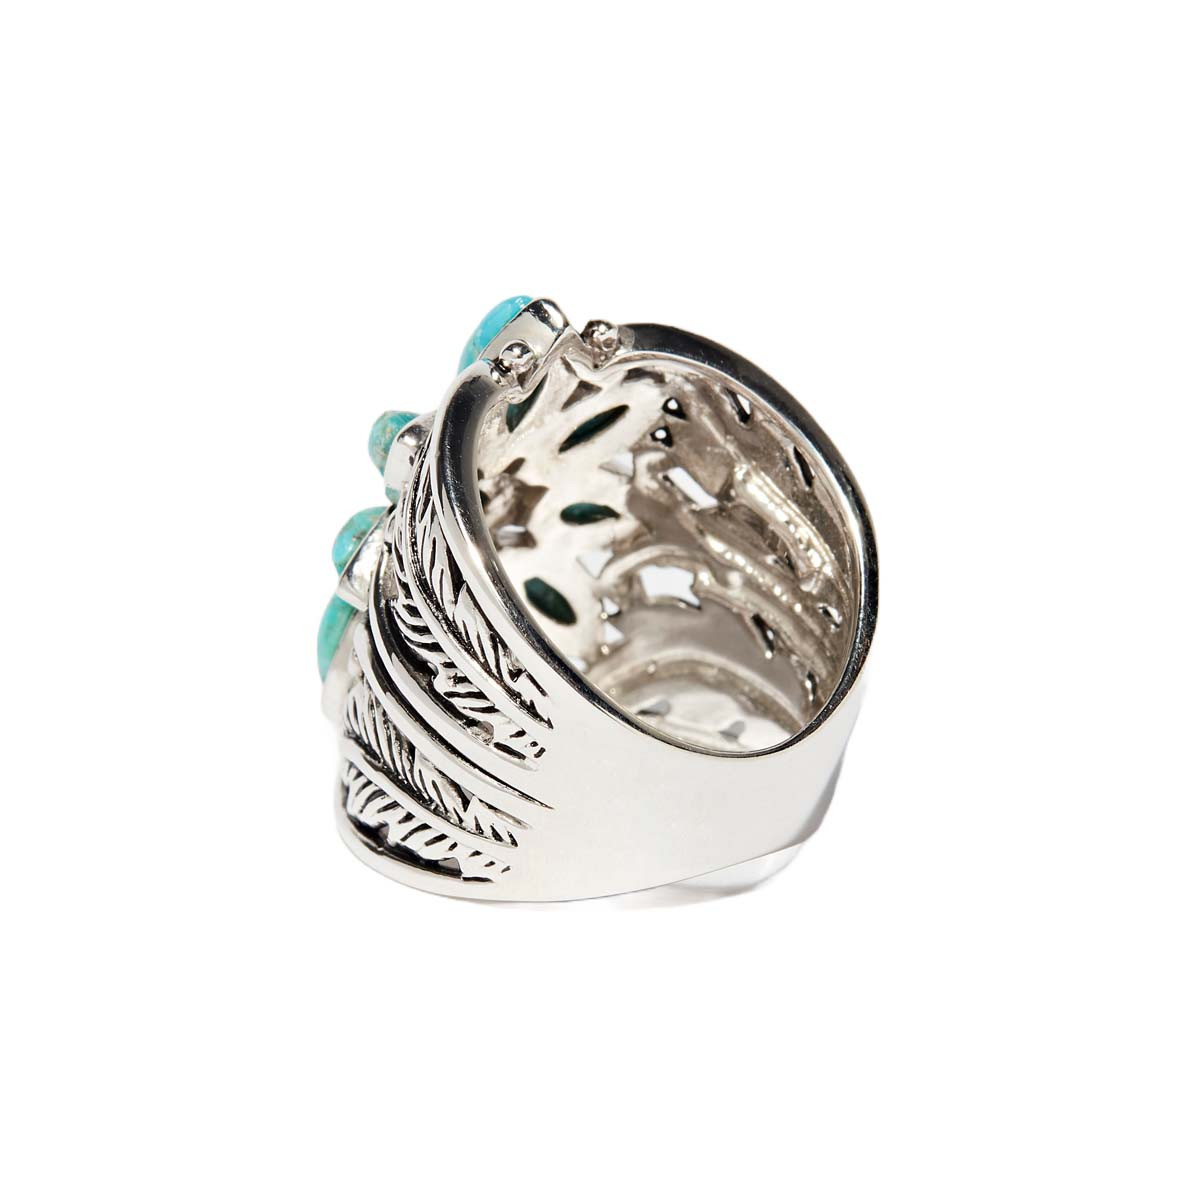 Bague "Tunche Turquoise" Argent 925